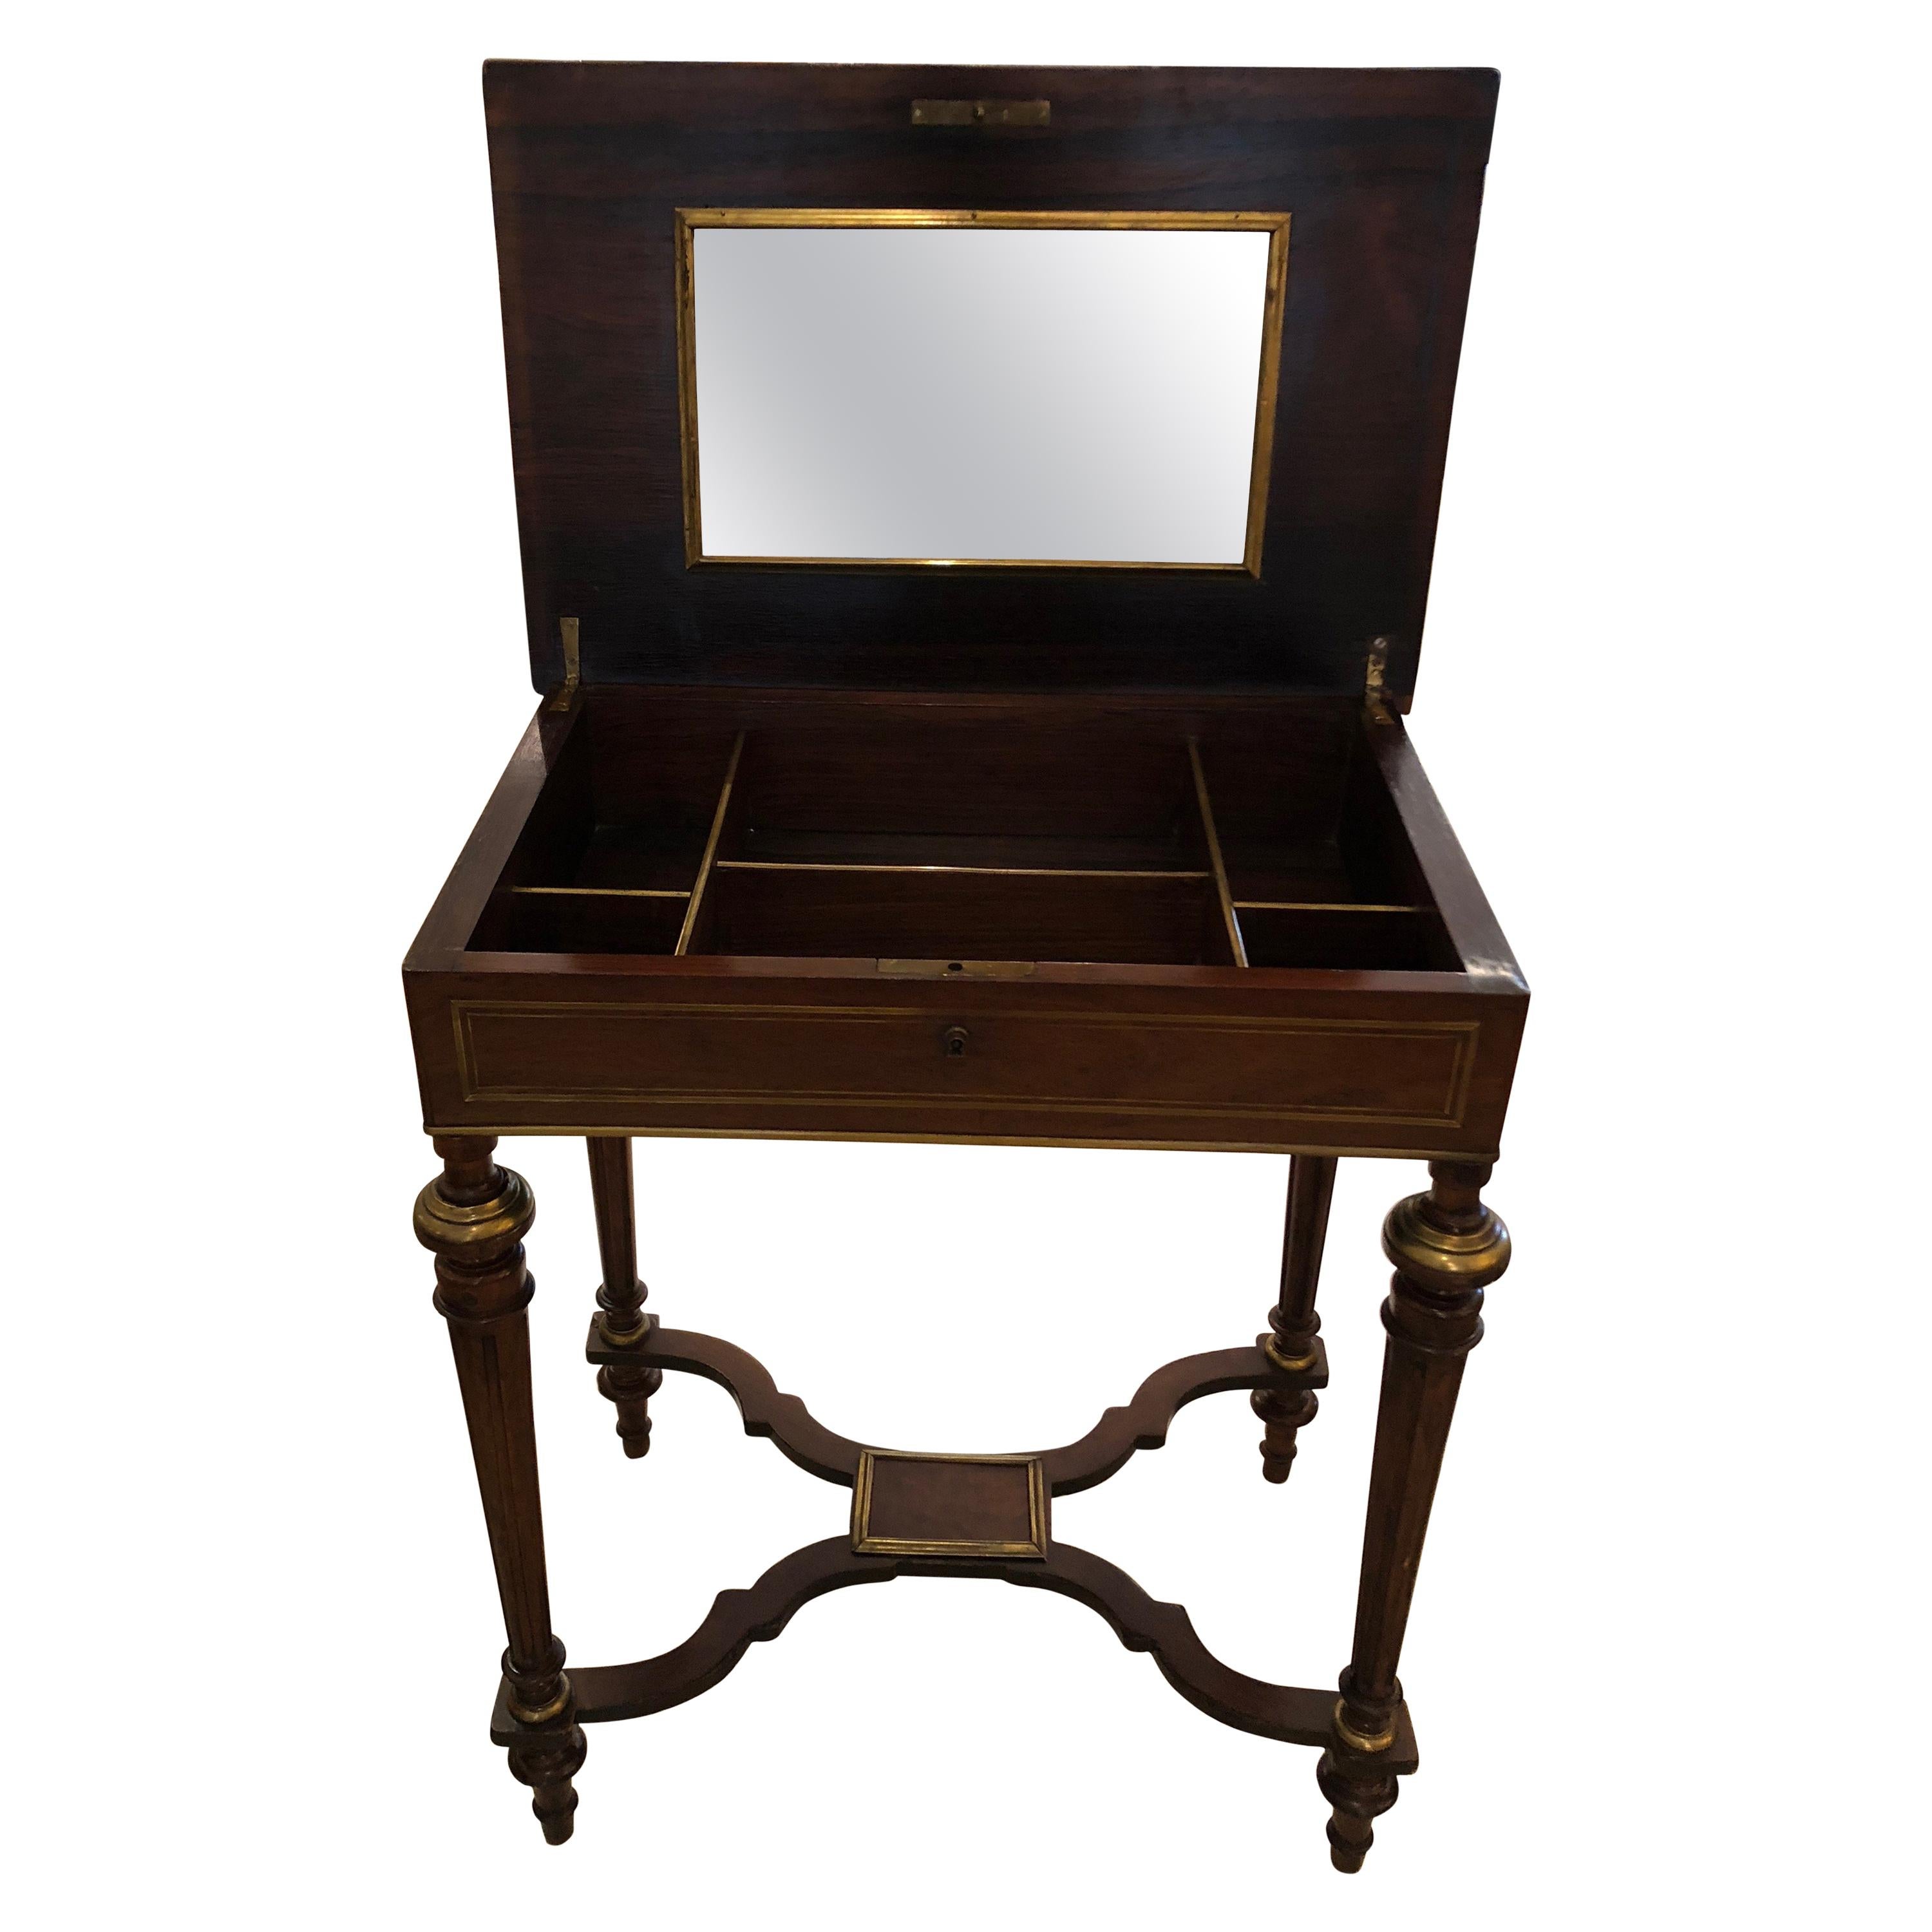 19th Century Mahogany and Brass Inlaid Side Table with Interior Compartments For Sale